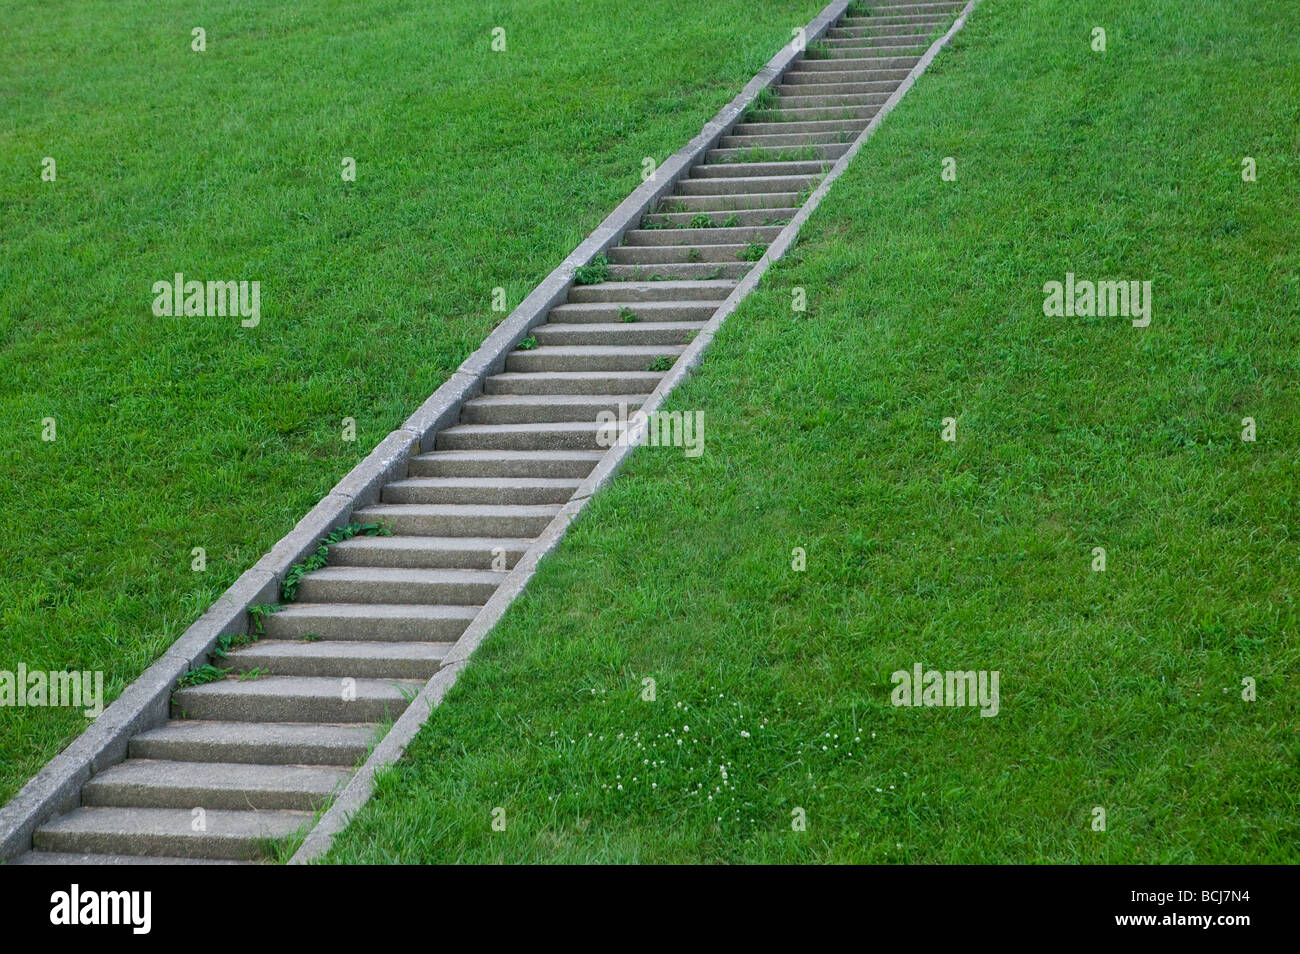 Diagonal pattern of concrete steps on grass covered hillside Stock Photo